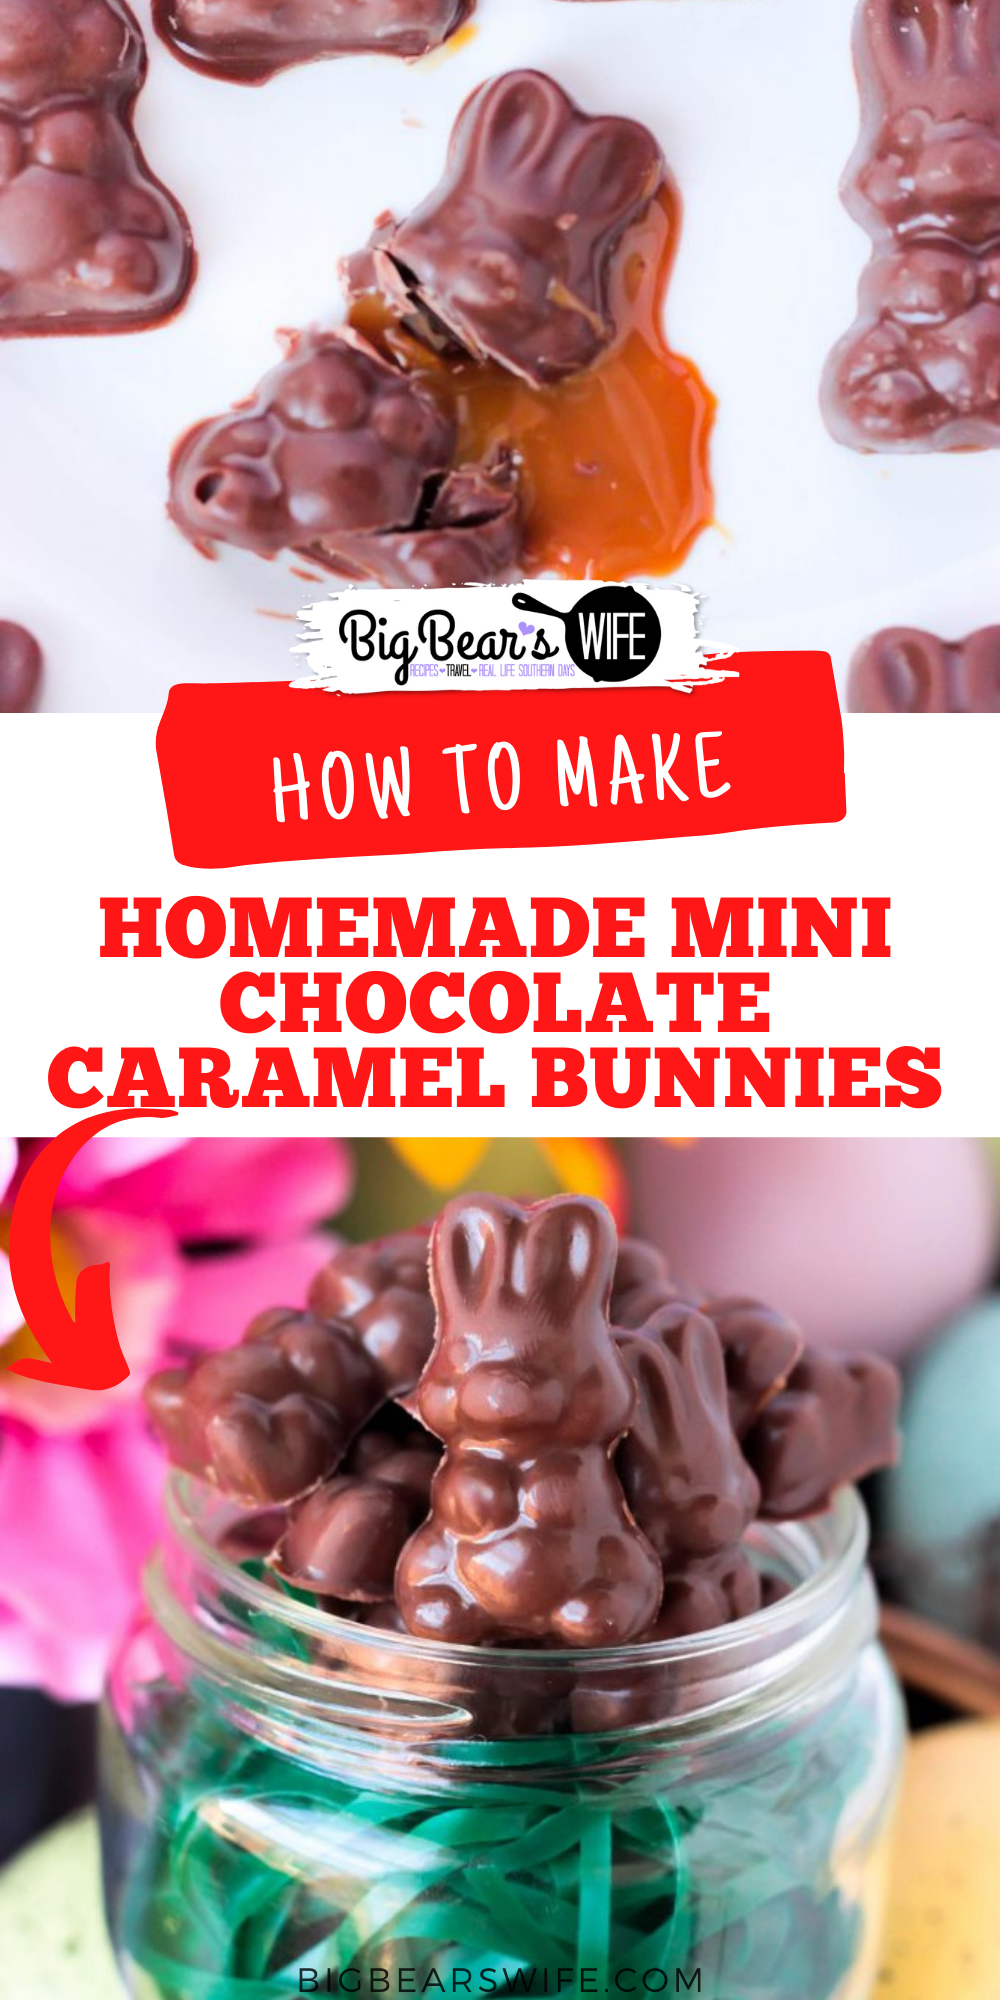 These Homemade Mini Chocolate Caramel Bunnies are really easy to make and they’re perfect for to top brownies, cakes and eclair desserts! They’re also the perfect Easter/Springtime ice cream toppers!

 via @bigbearswife